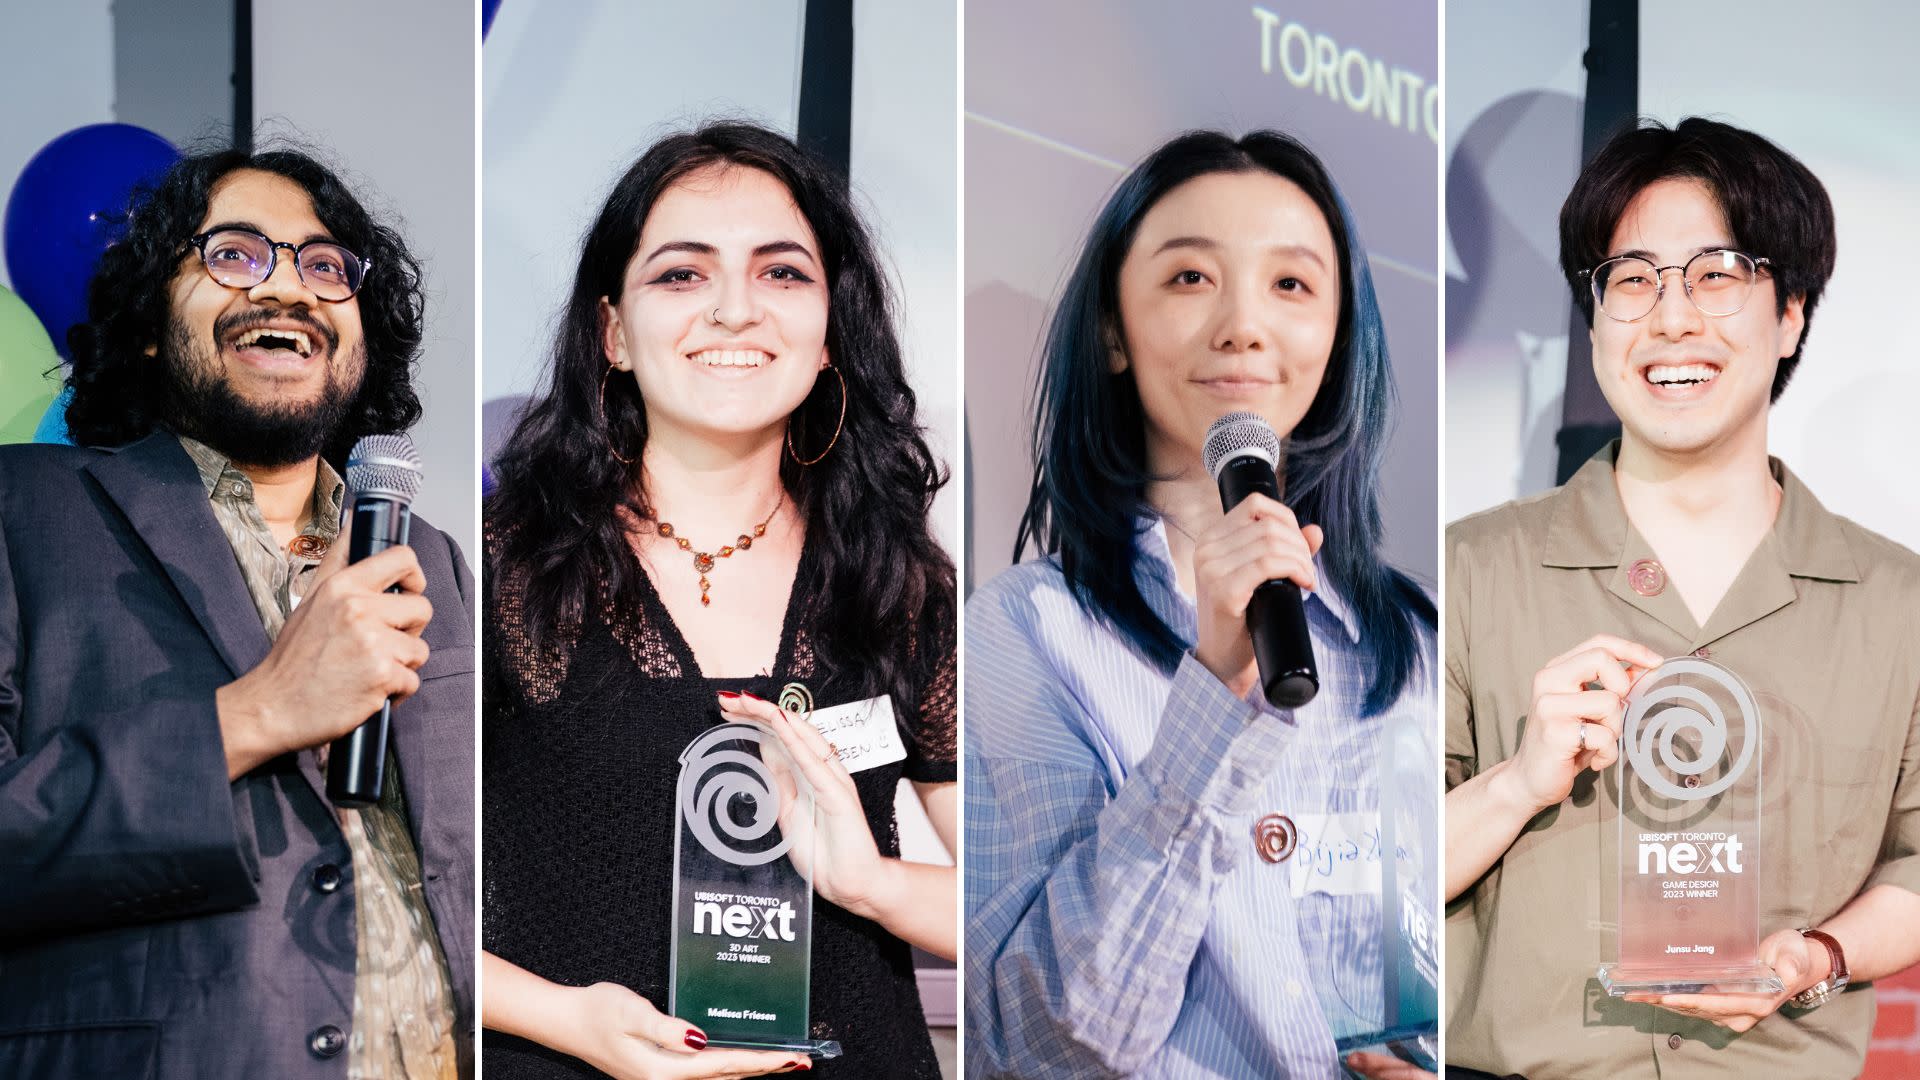 Breaking Into the Game Industry: Ubisoft Toronto NEXT Winners Share Their Experience